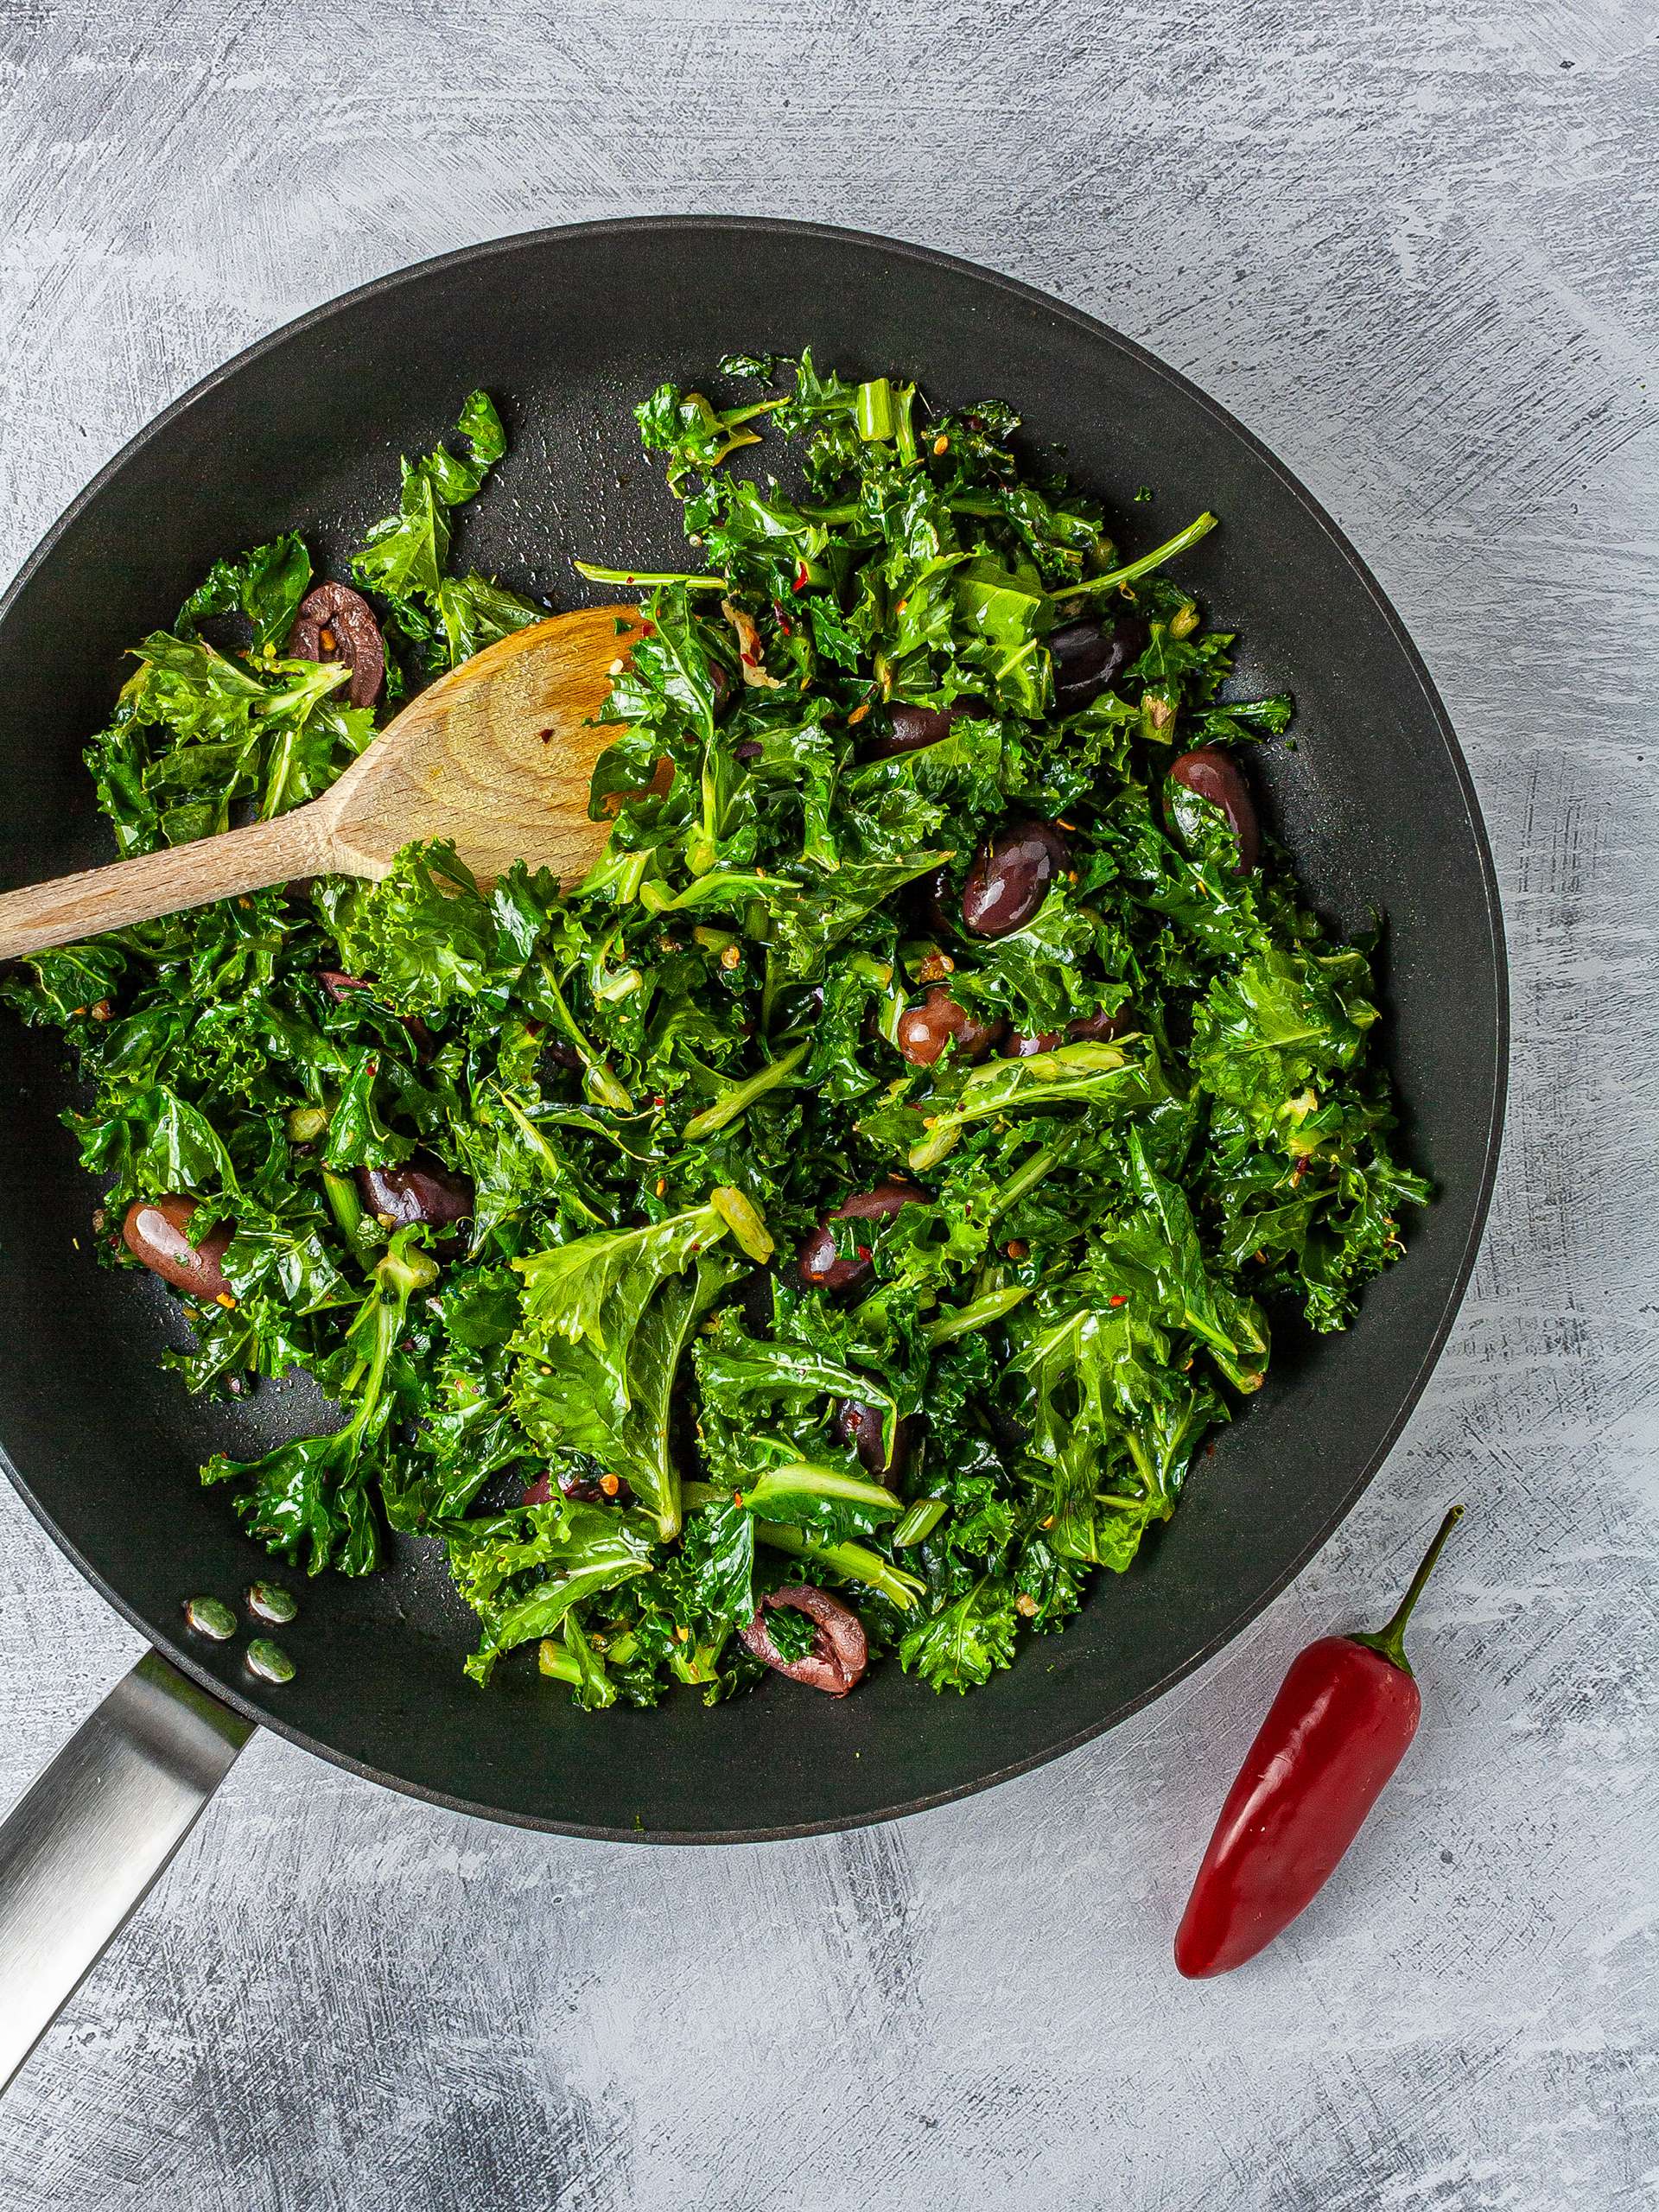 Kale cooked in a pan with chillies and olives.